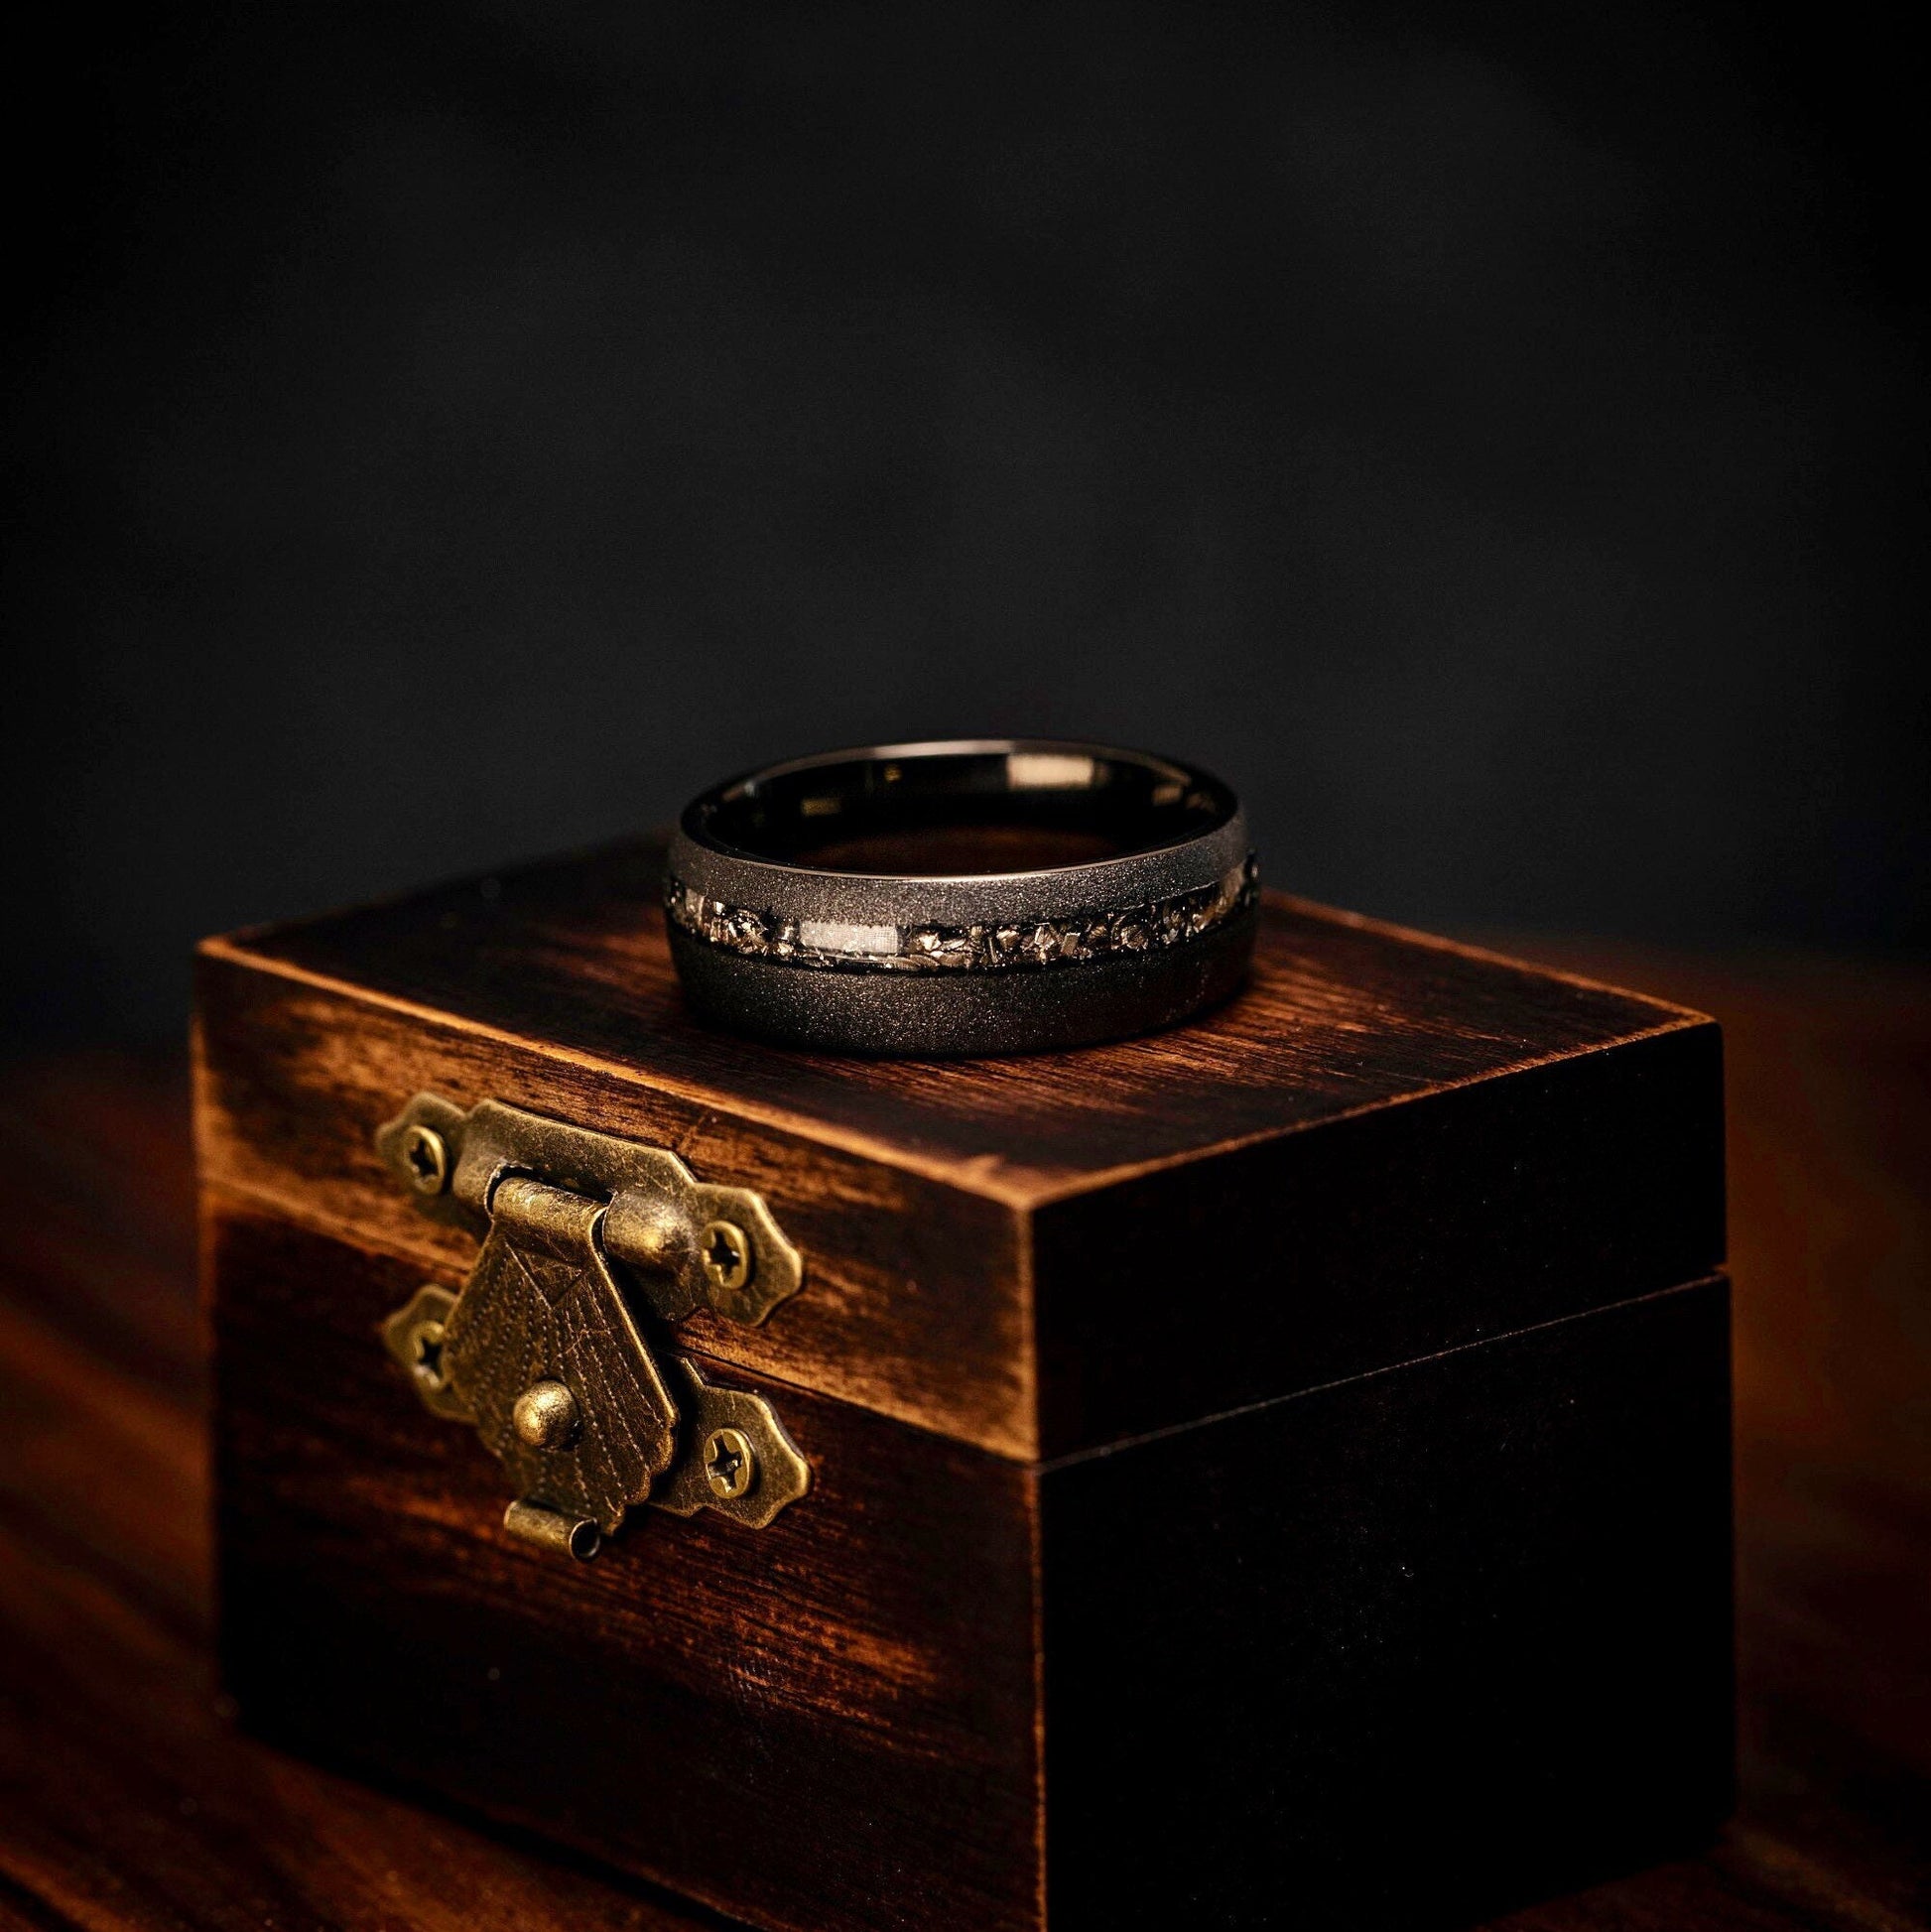 His and hers wedding bands featuring real meteorite and black sandblasted design.